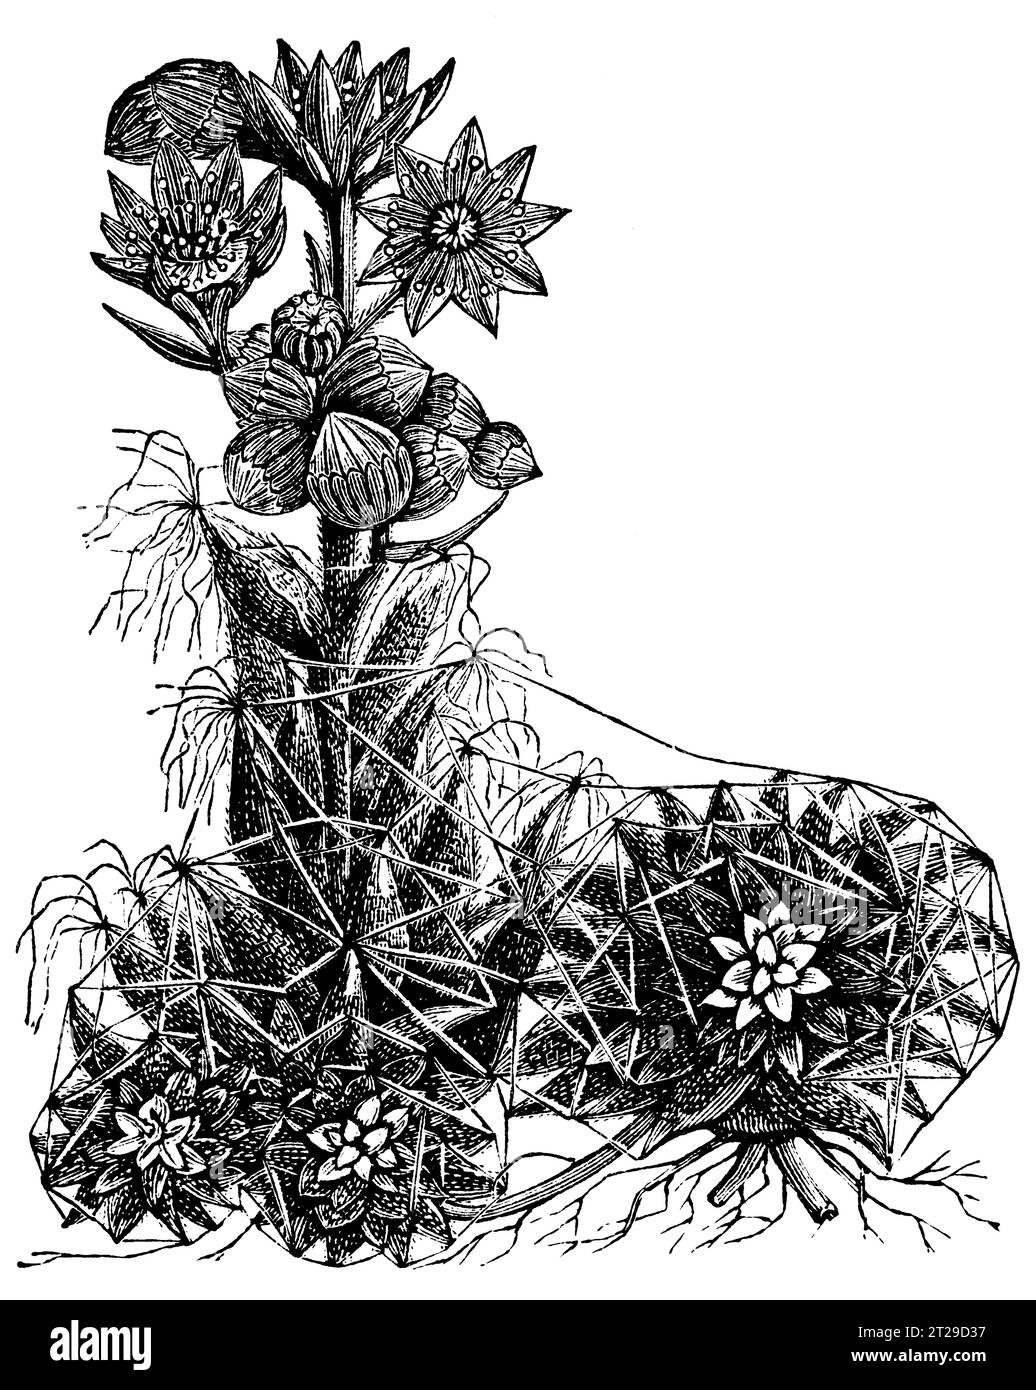 Sempervivum arachnoideum, digitally restored from 'The Condensed American Encyclopedia' published in 1882. Stock Photo